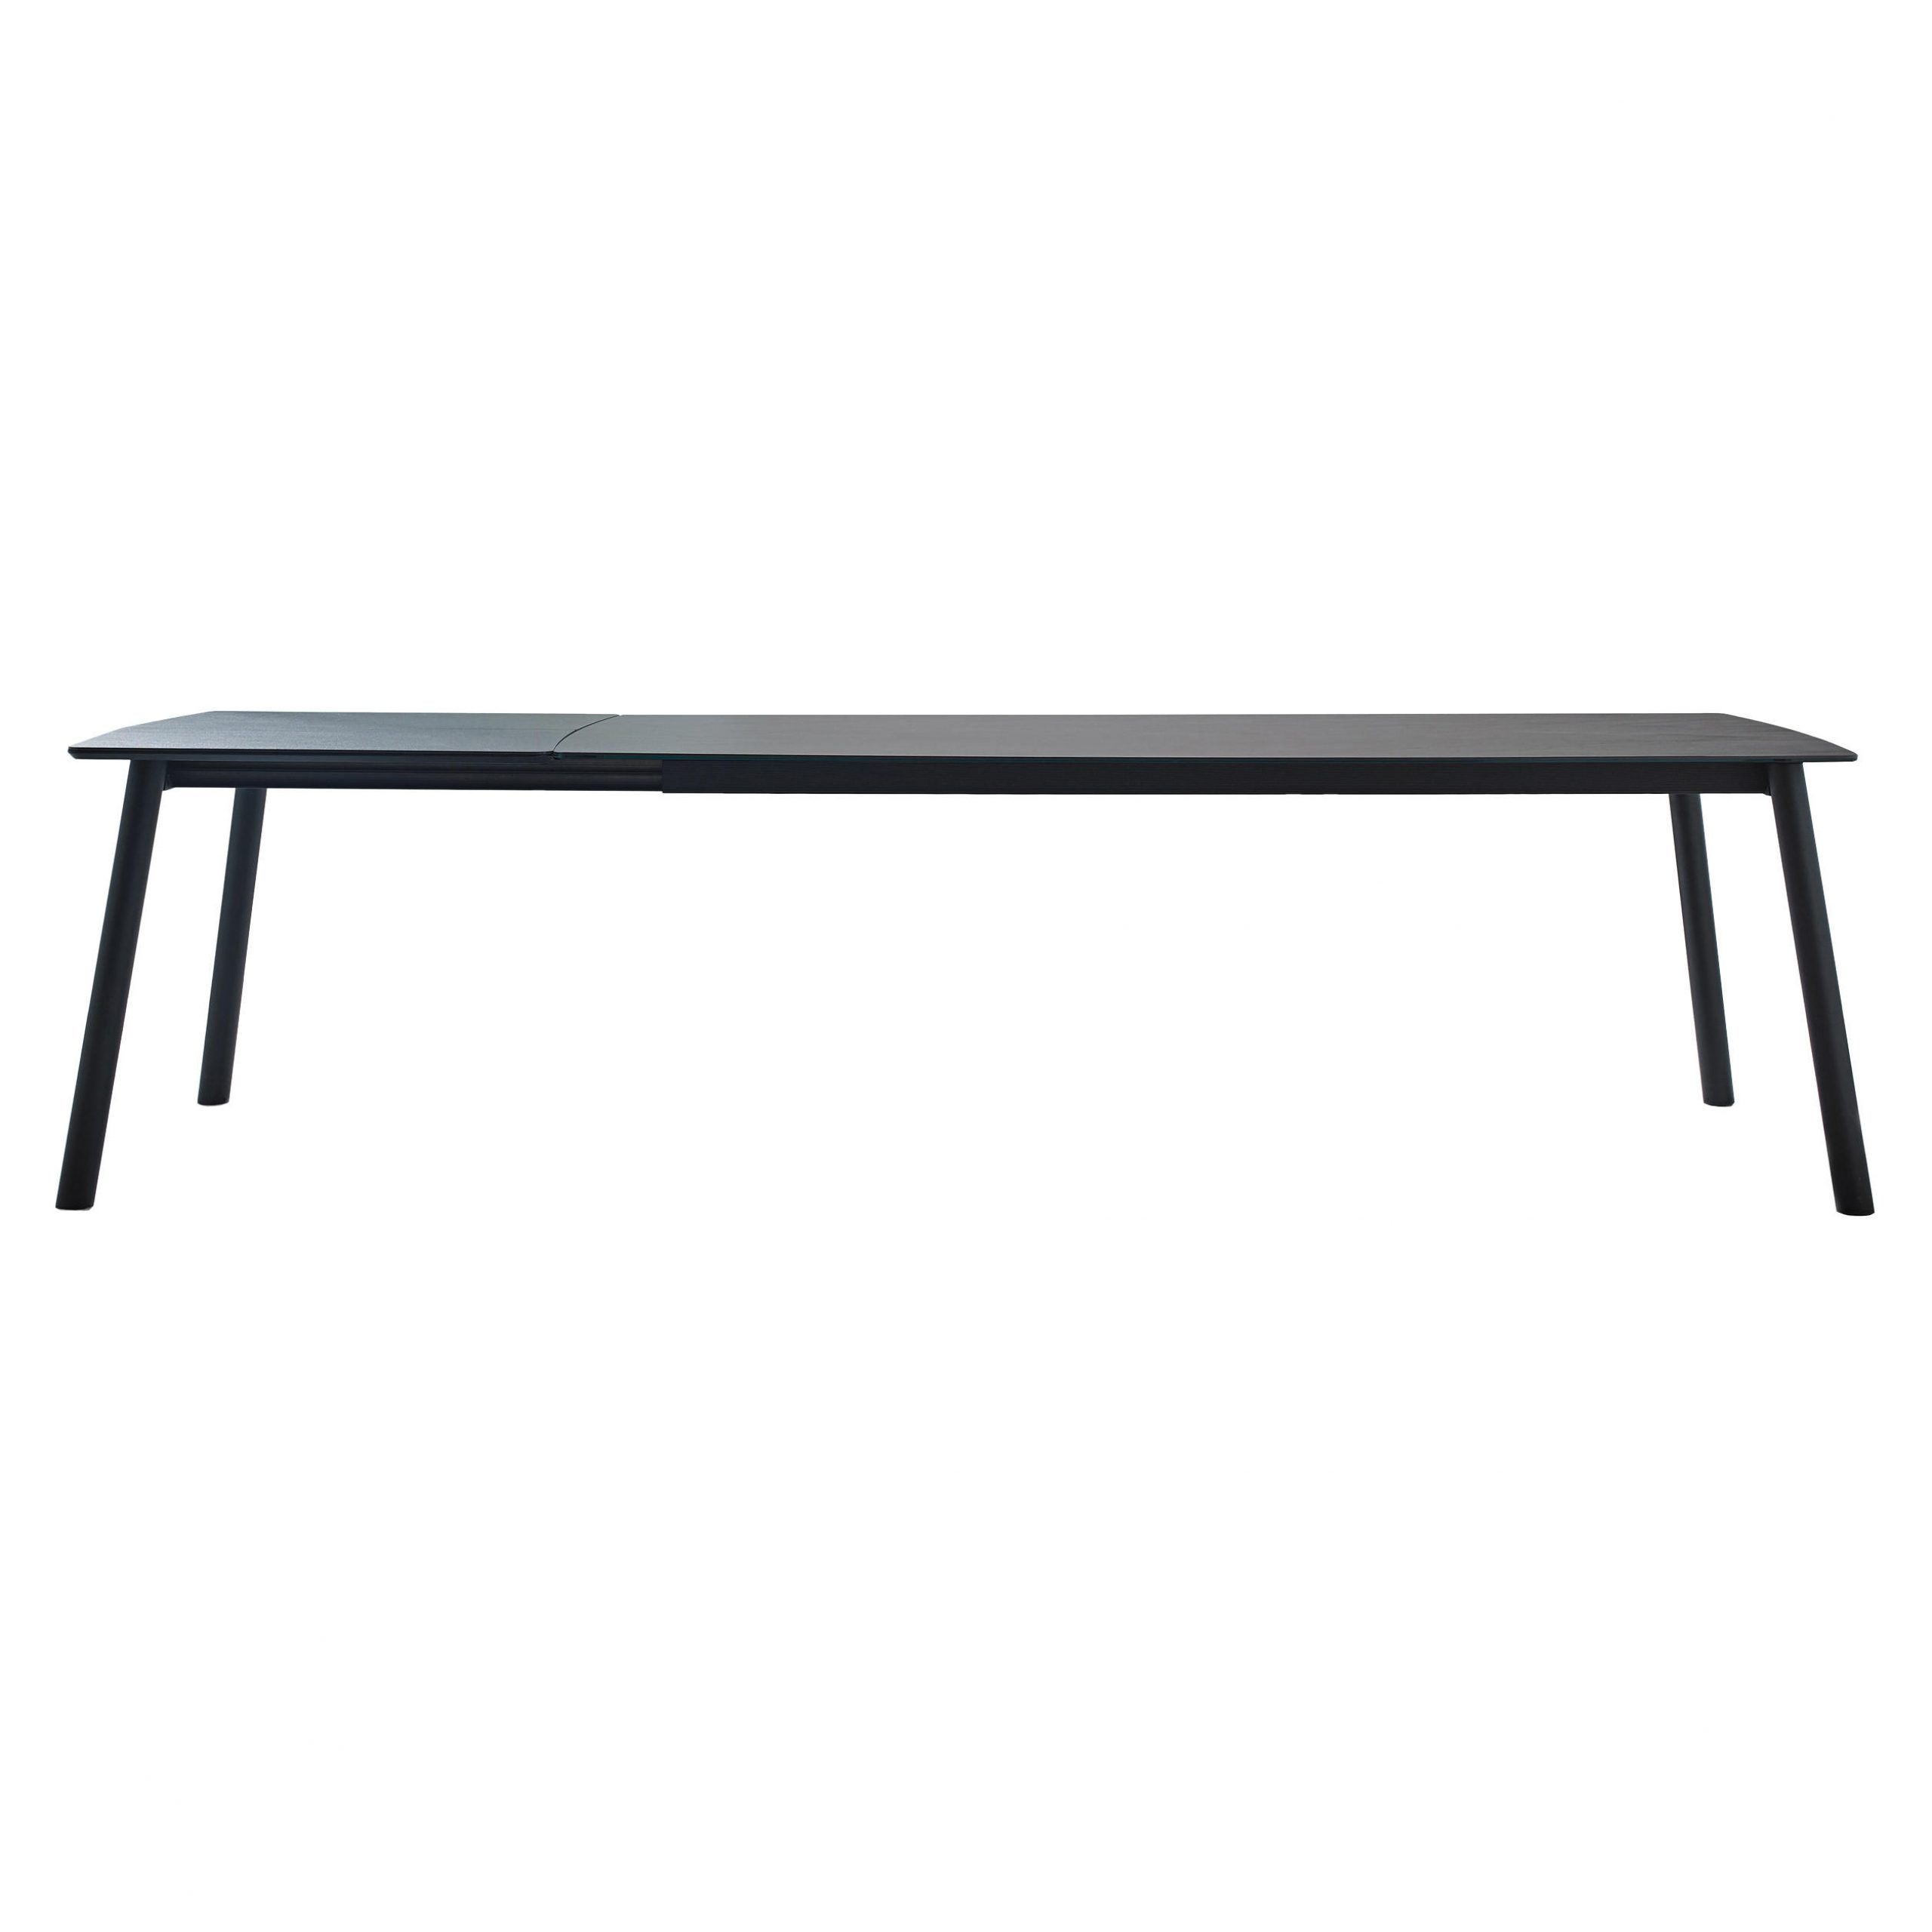 Most Popular Dining Tables With Black U Legs With Regard To Köln Metal Legs & Designer Furniture (View 13 of 30)